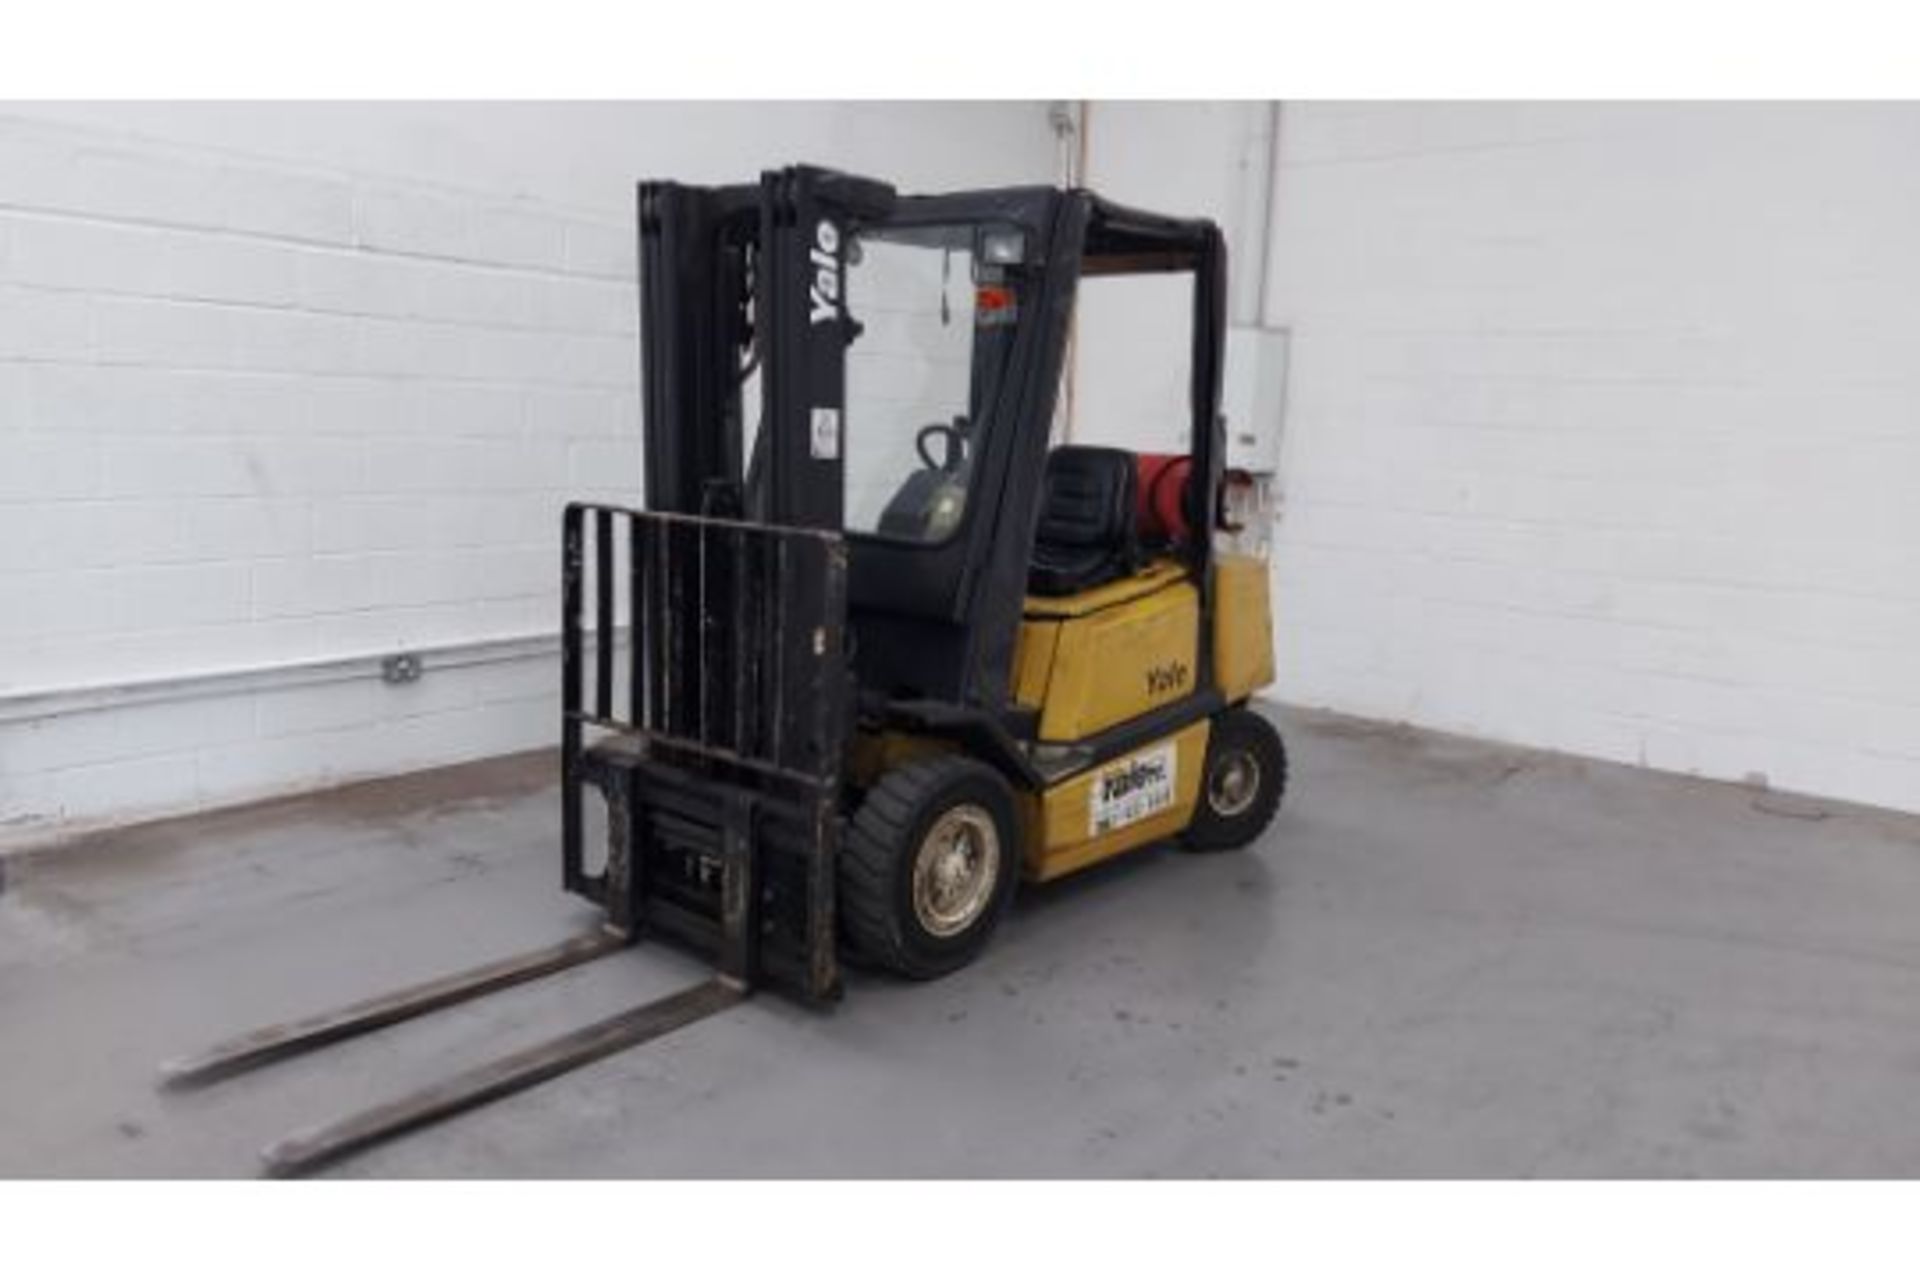 Yale GLP25RFE2170 Gas Forklift Truck. 2.5 Ton Capacity, Last Service 26/05/23, Running Hours 10,881